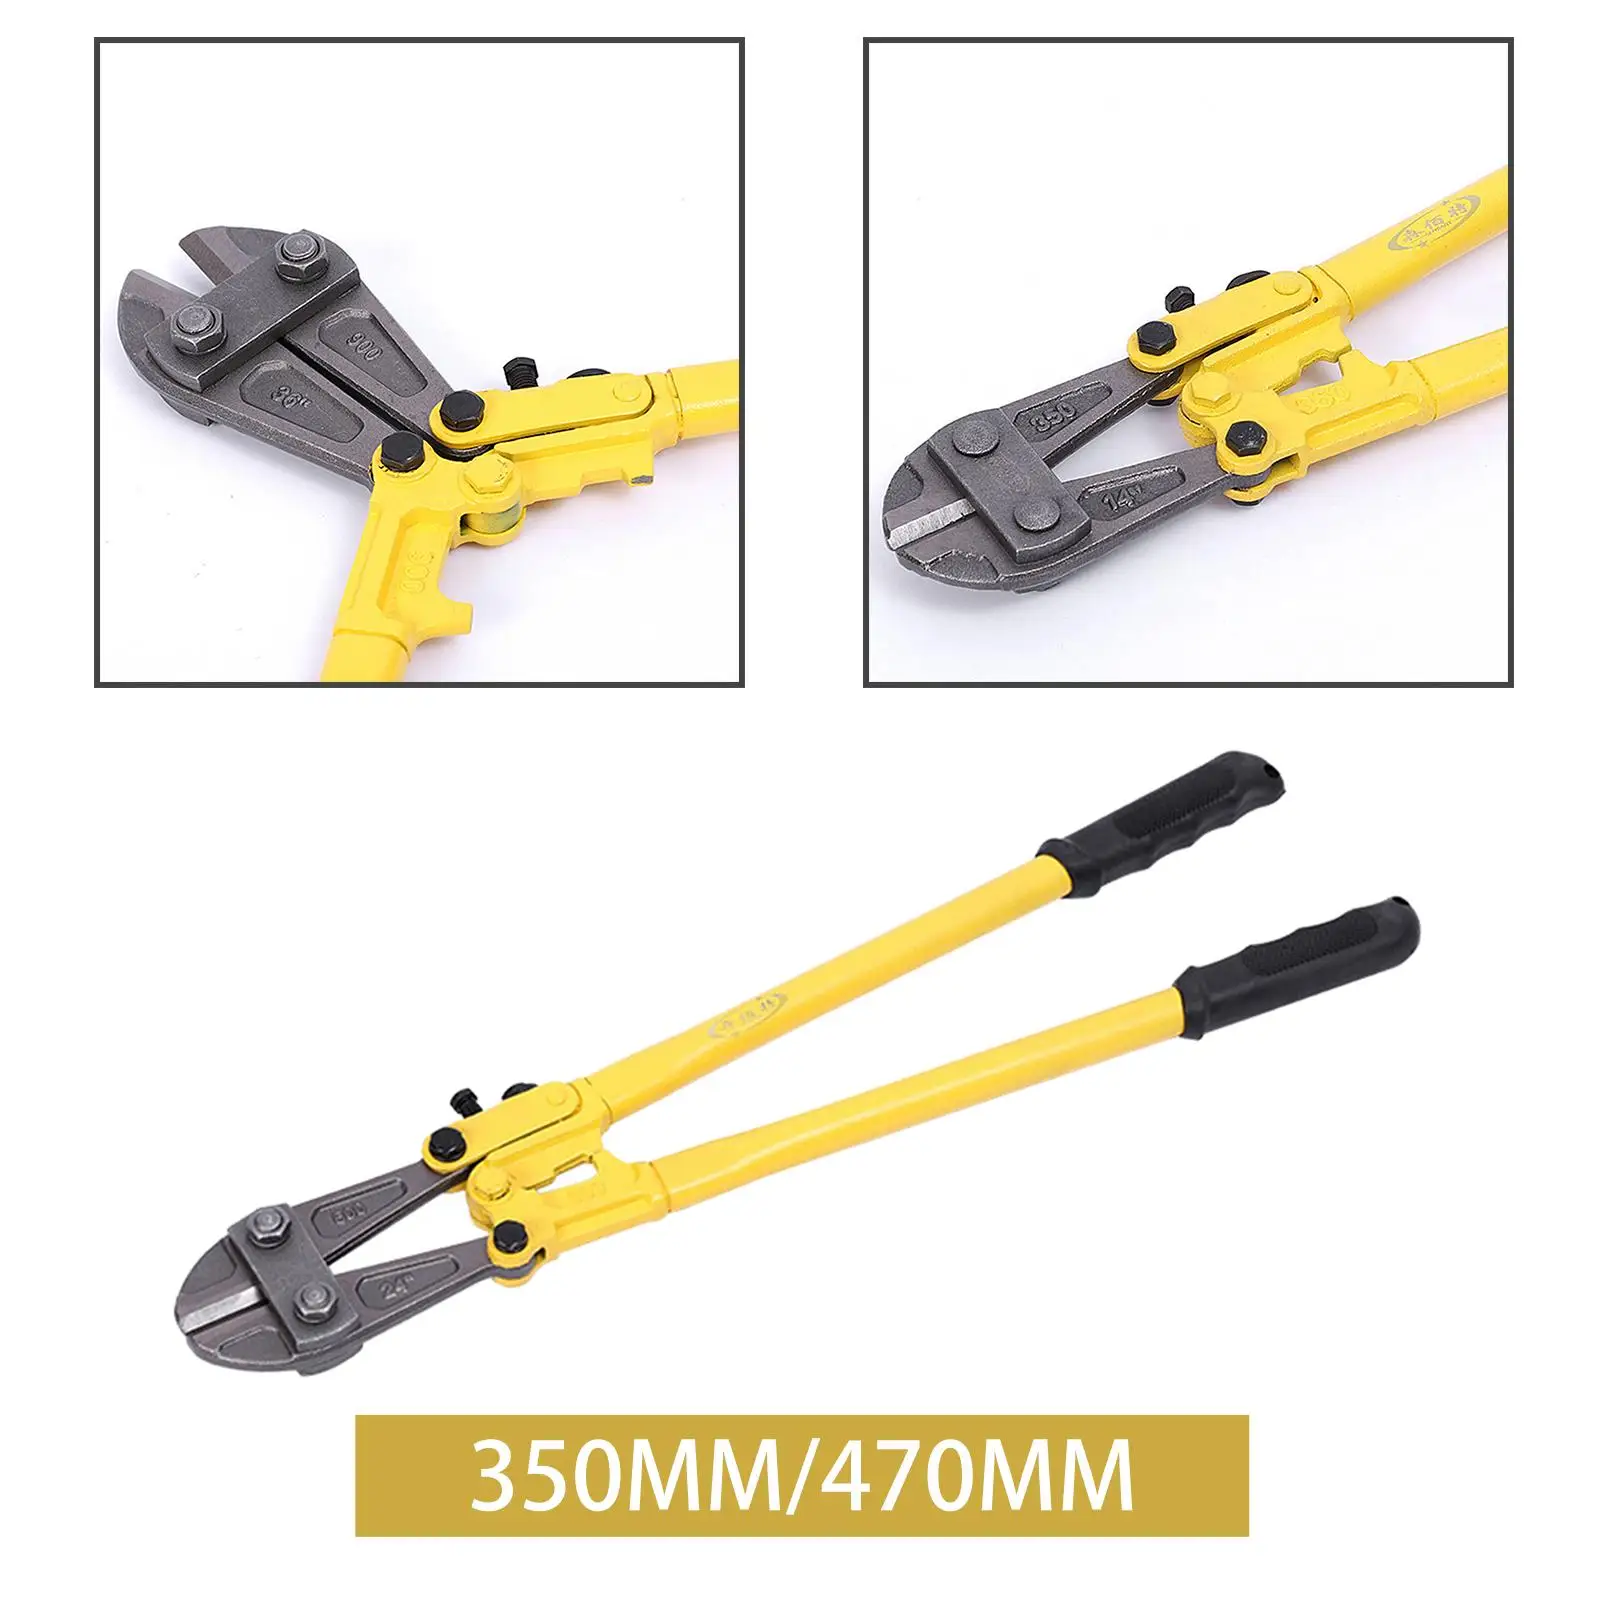 Bolt Cutter with Comfort Grip Labor Saving Manual Steel Wire Cutter for Bolts Metal Rods Small Padlocks Chain Link Fence Rivets